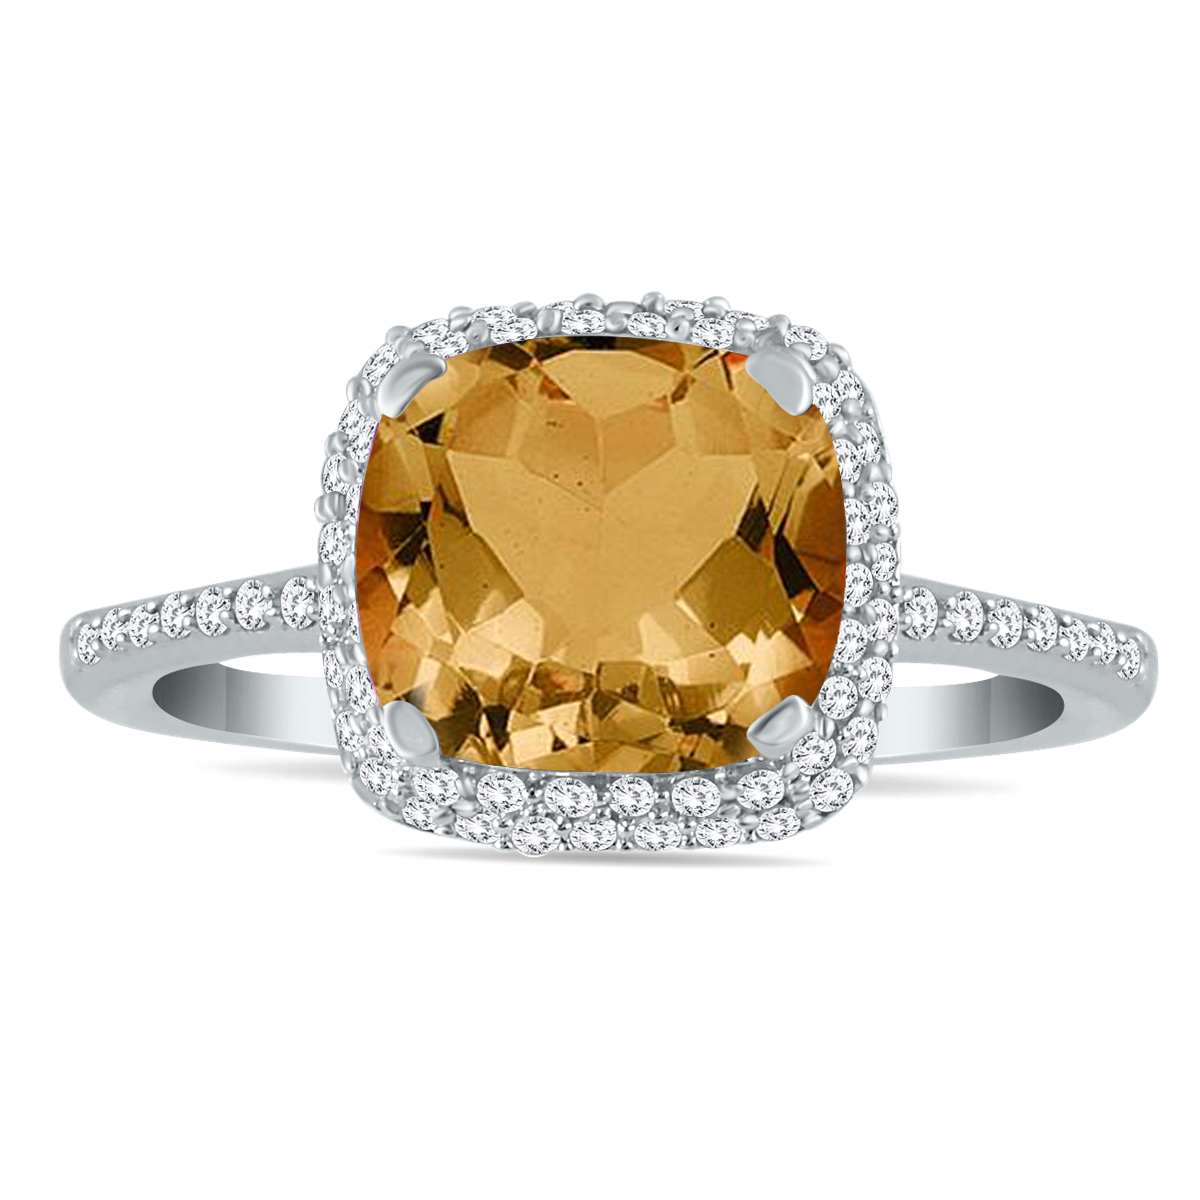 Cushion Cut Citrine and Diamond Halo Ring in 10K White Gold